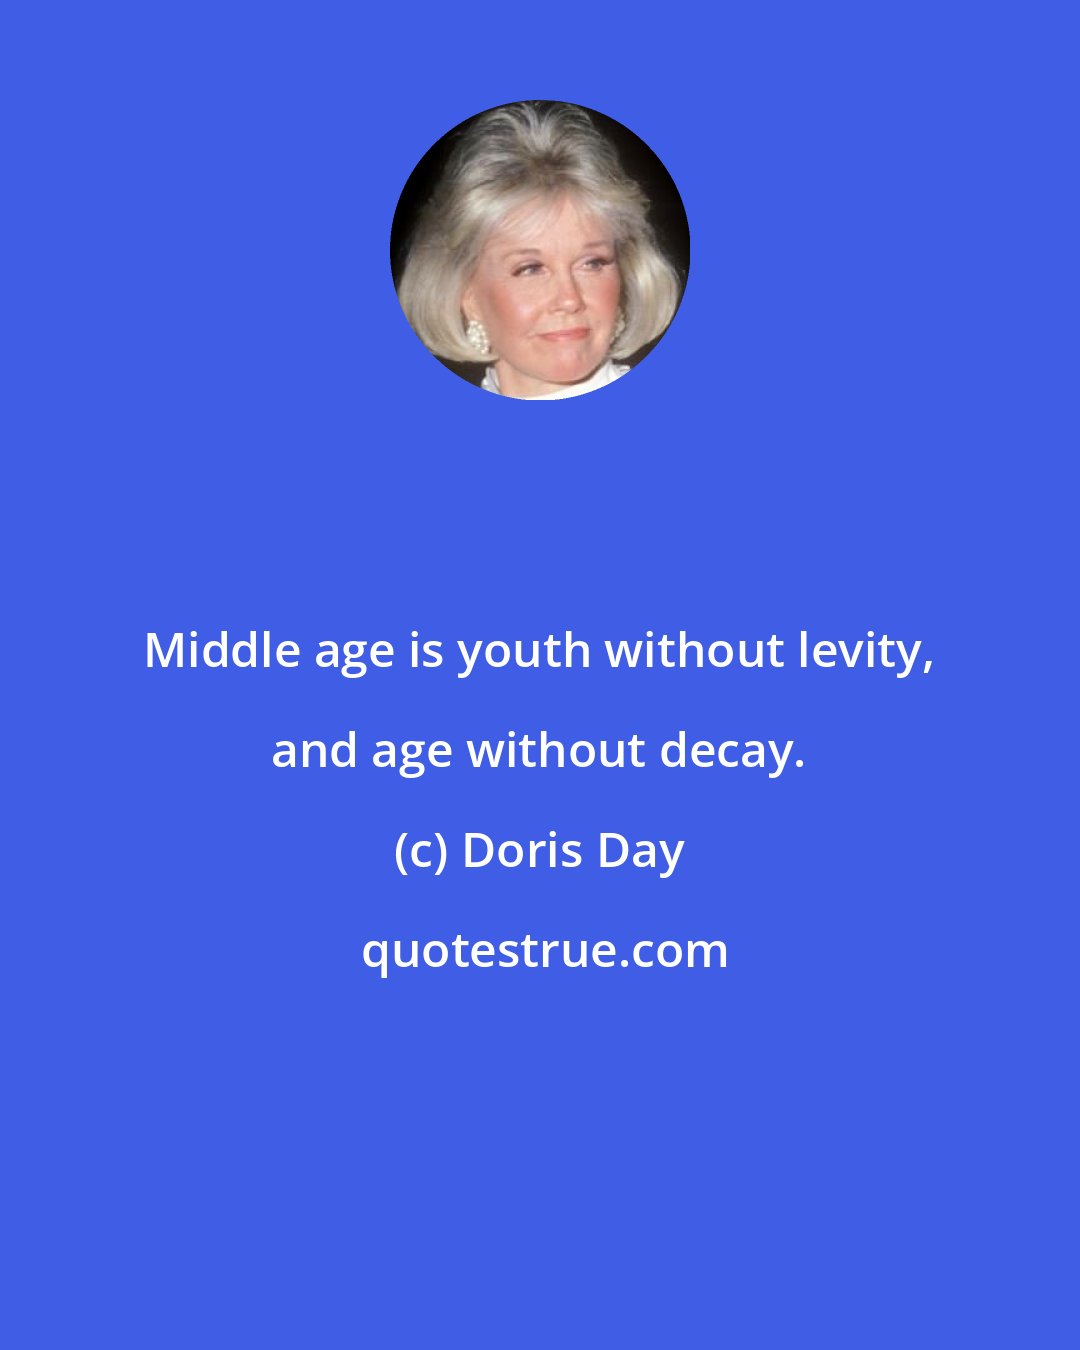 Doris Day: Middle age is youth without levity, and age without decay.